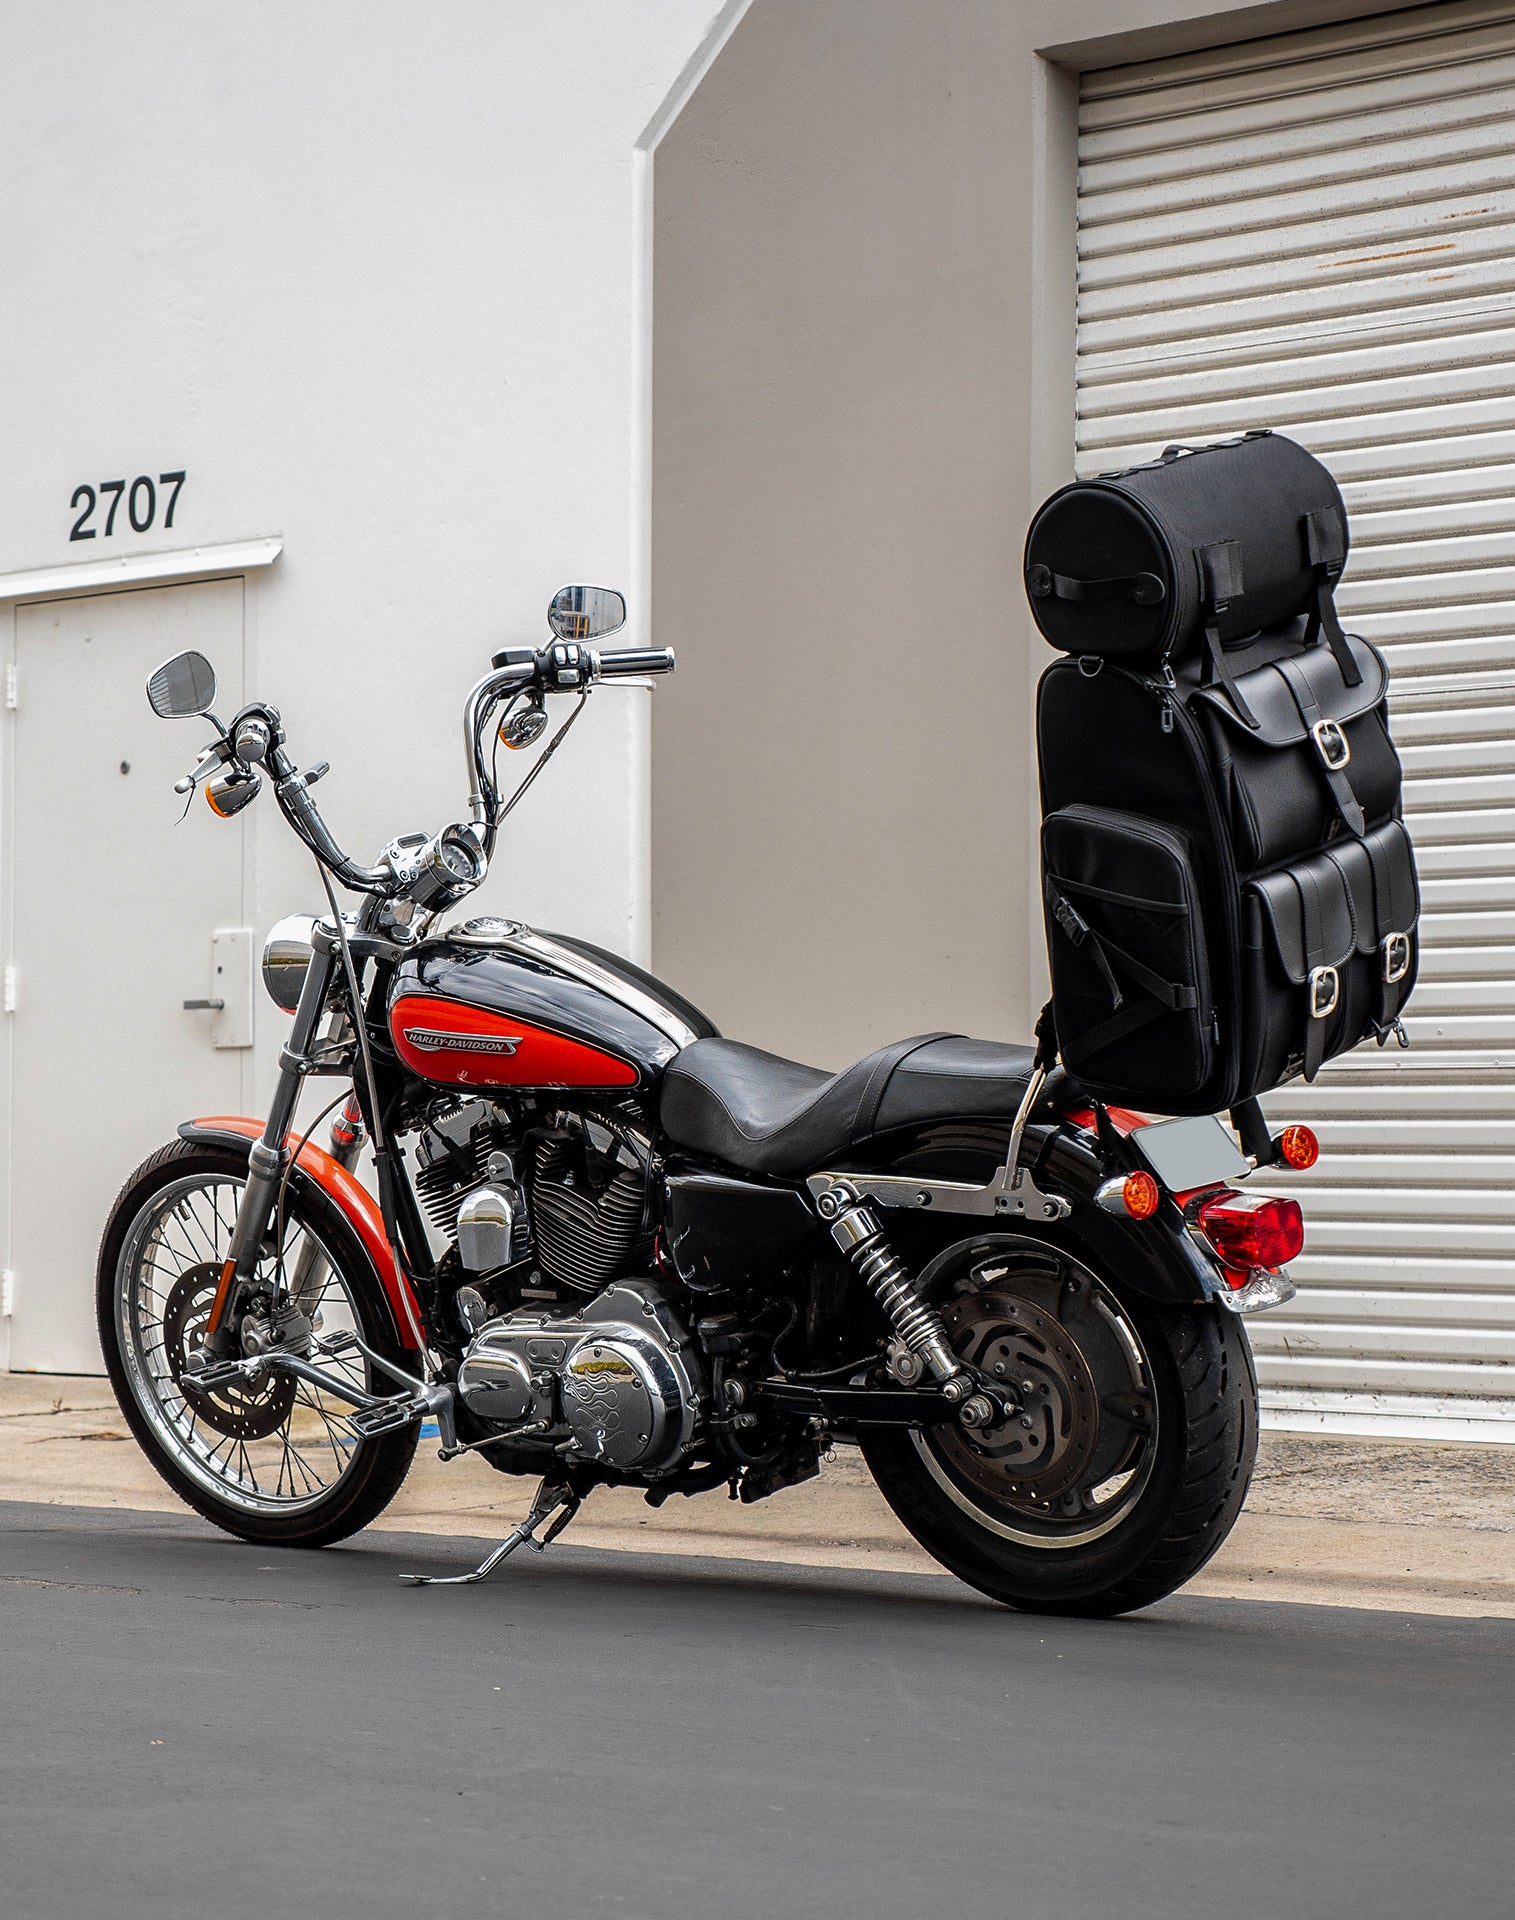 55L - Highway Extra Large Plain Motorcycle Tail Bag for Harley Davidson